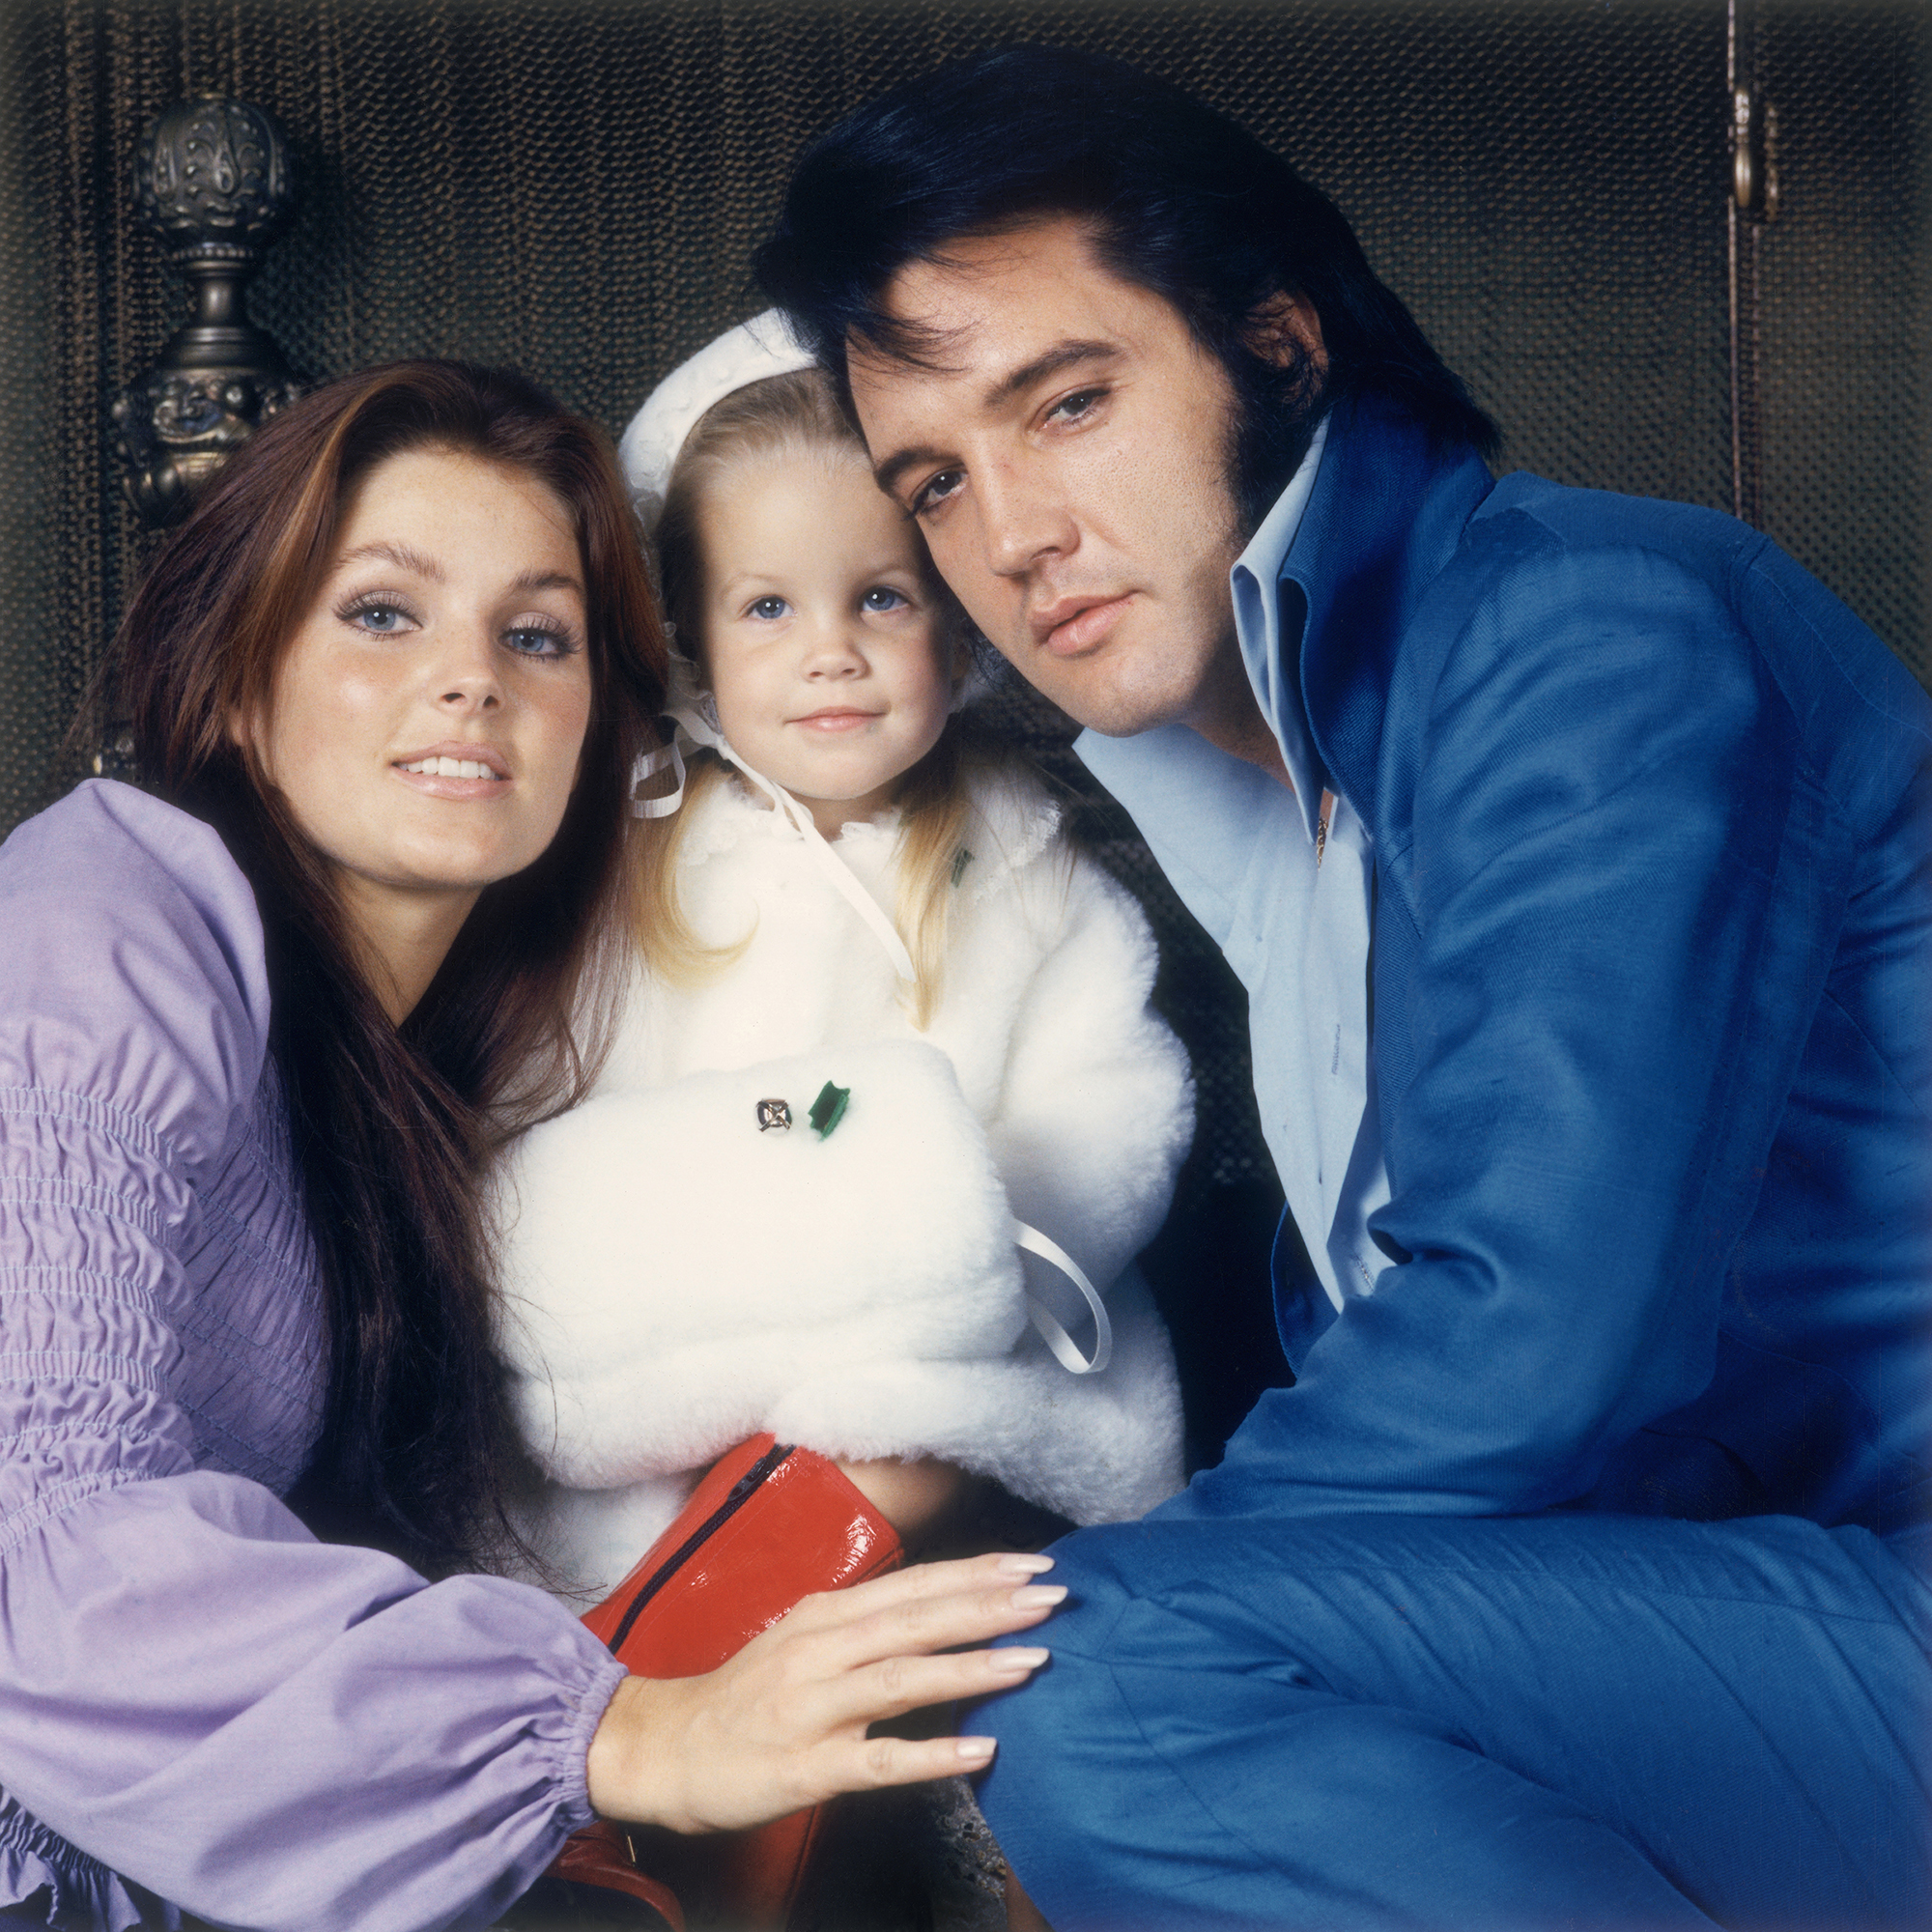 Elvis with his wife Priscilla and their daughter Lisa-Marie pose for a portrait, 1970's.